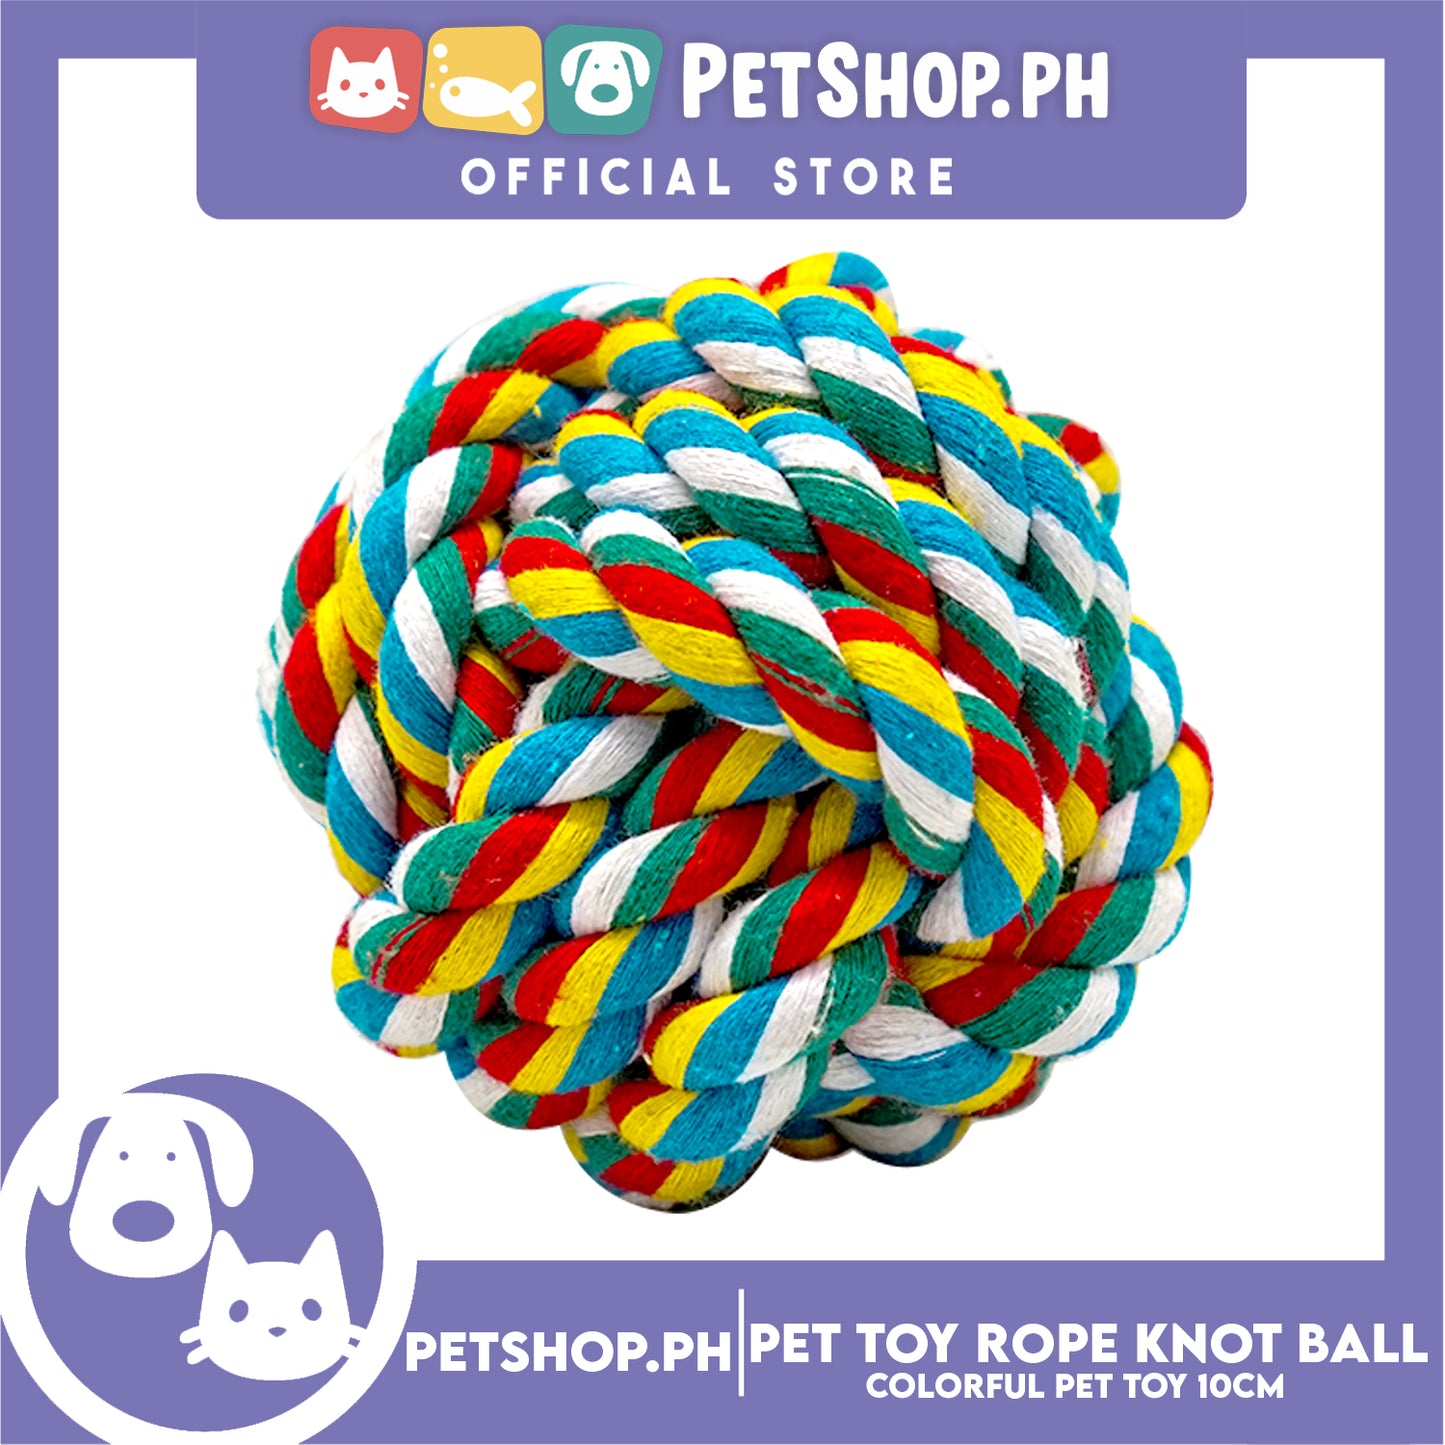 Pet Toy Colorful Rope Knot Ball 10cm for Medium Dog & Cat -Teething Chew Toy, Tug Toy, Knots Weave